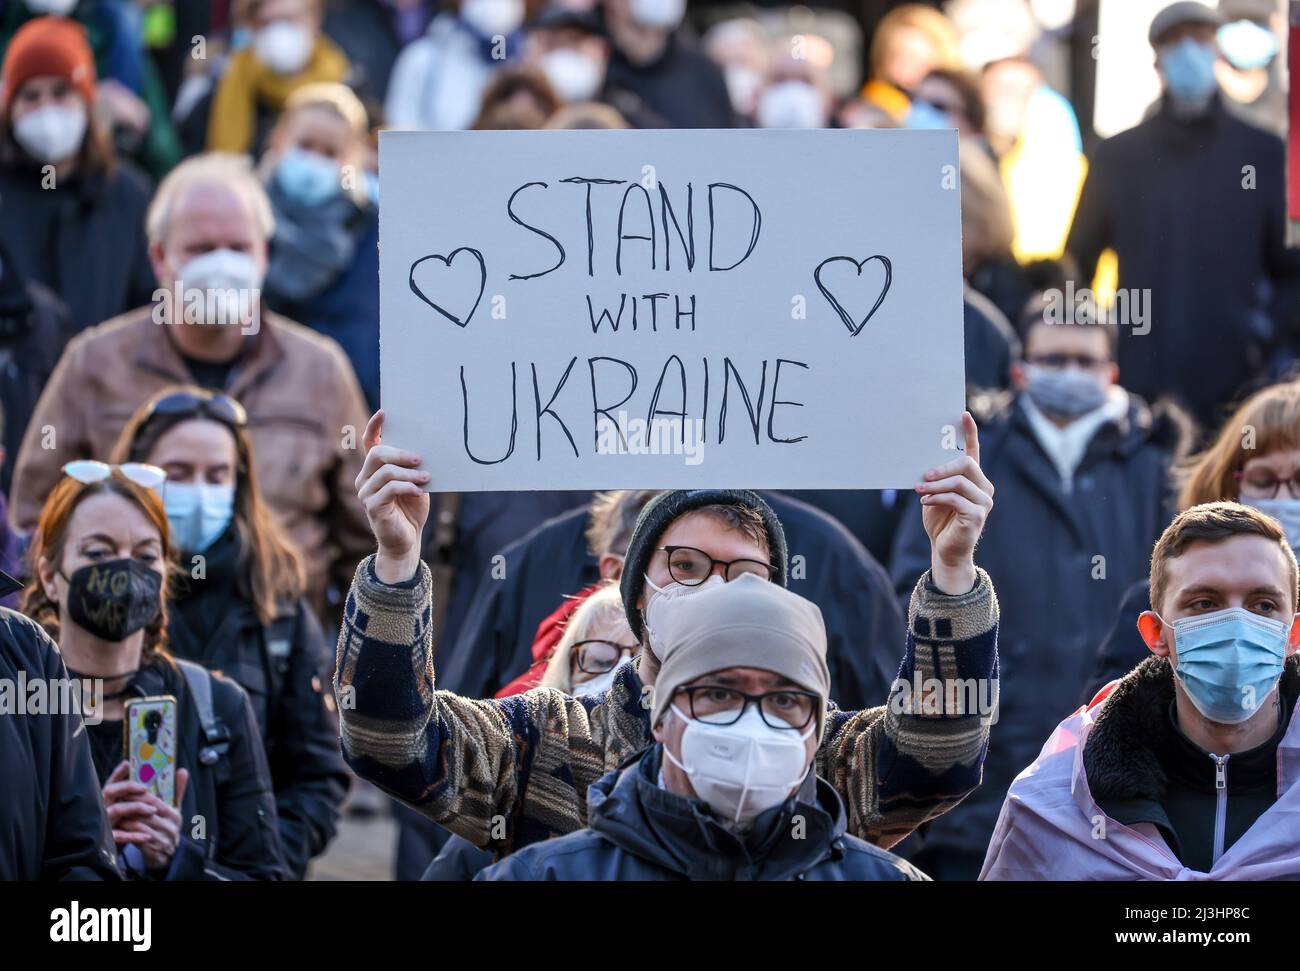 Wesel, North Rhine-Westphalia, Germany - Demonstration against Putin's war in Ukraine. Peace demonstration and solidarity rally for Ukraine at the Great Market in Wesel. In times of corona pandemic all demonstrators wear masks. Stock Photo